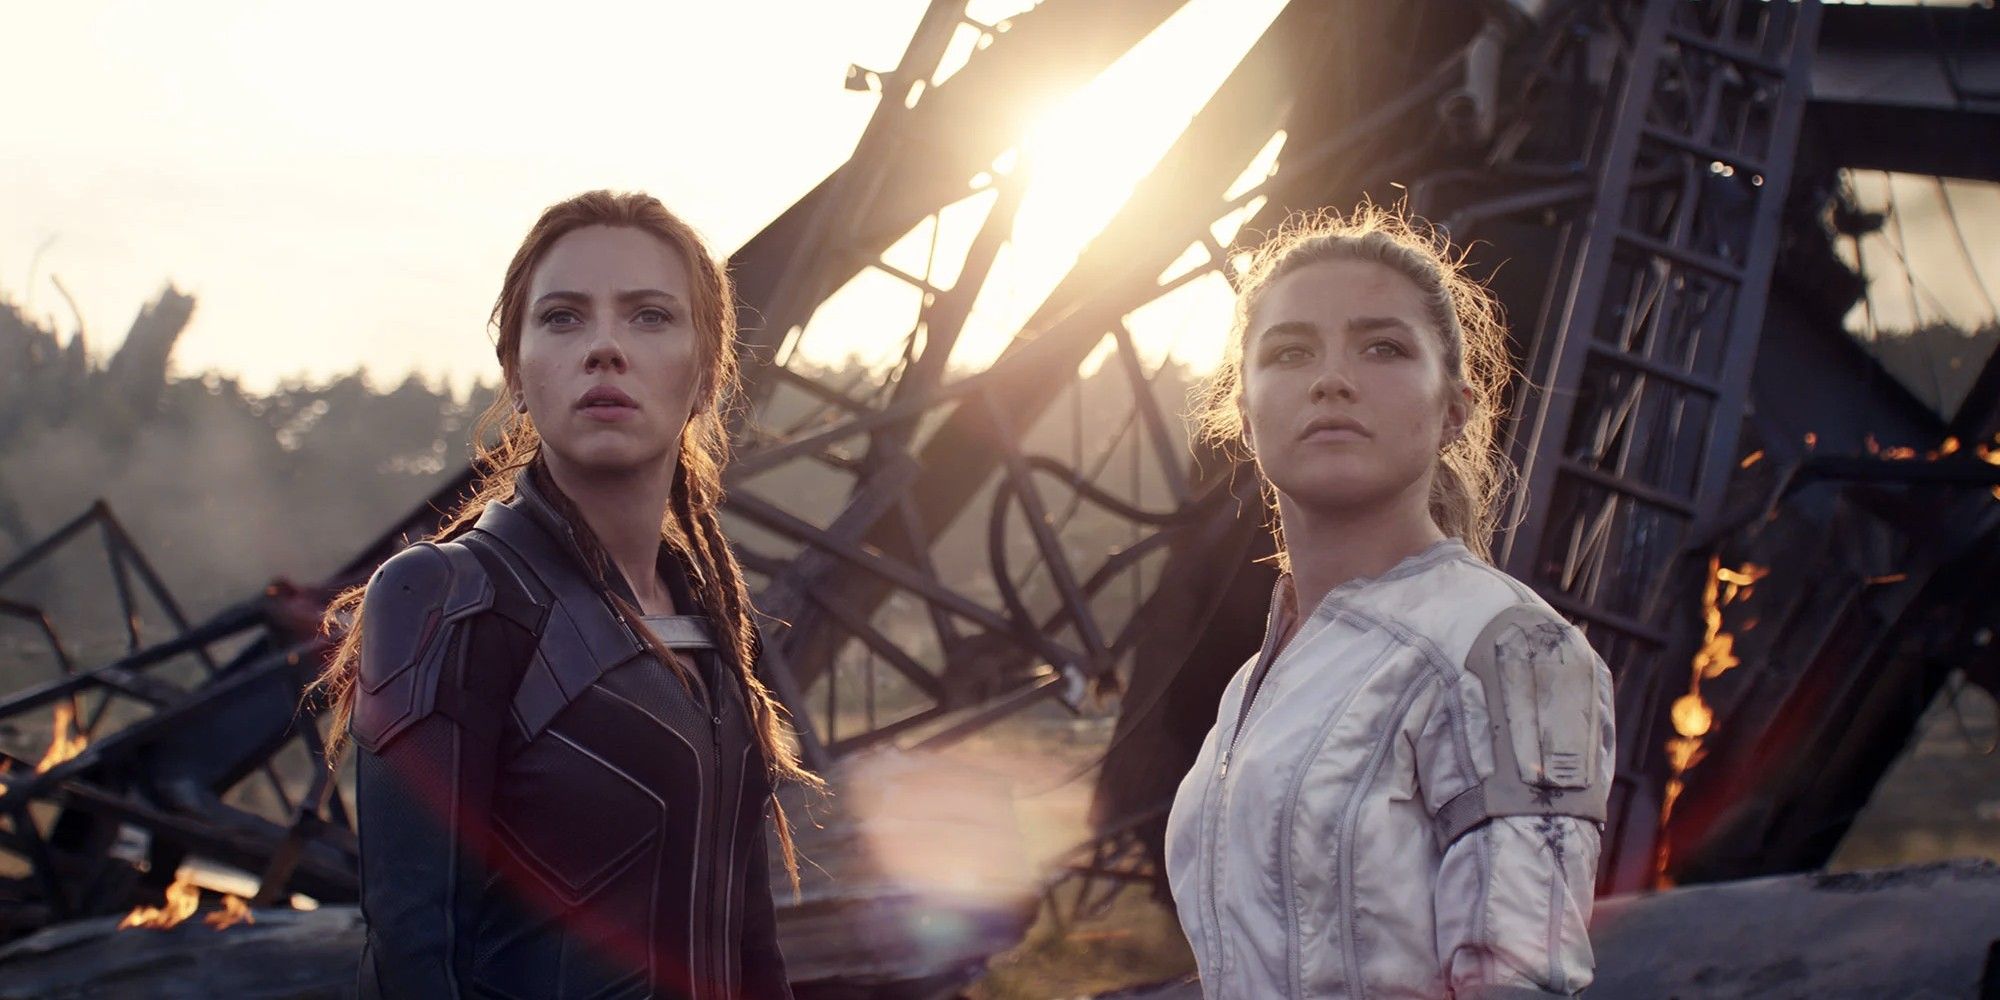 Scarlet Johansson and Florence Pugh in 'Black Widow'